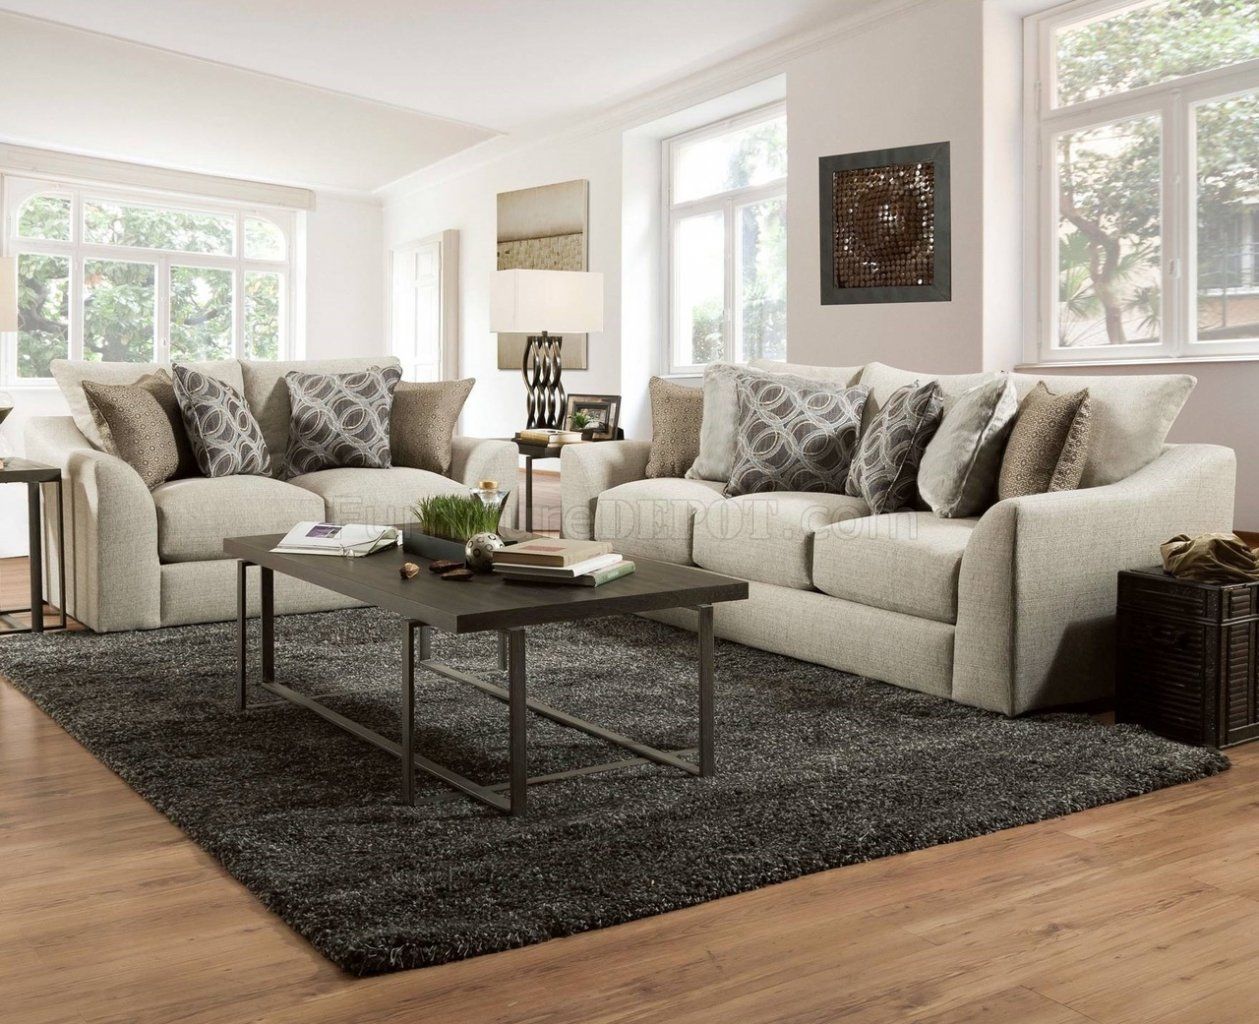 2 Piece Oversized Sofa & Loveseat Set In Espresso Micro Suede Within 110" Oversized Sofas (Gallery 13 of 20)